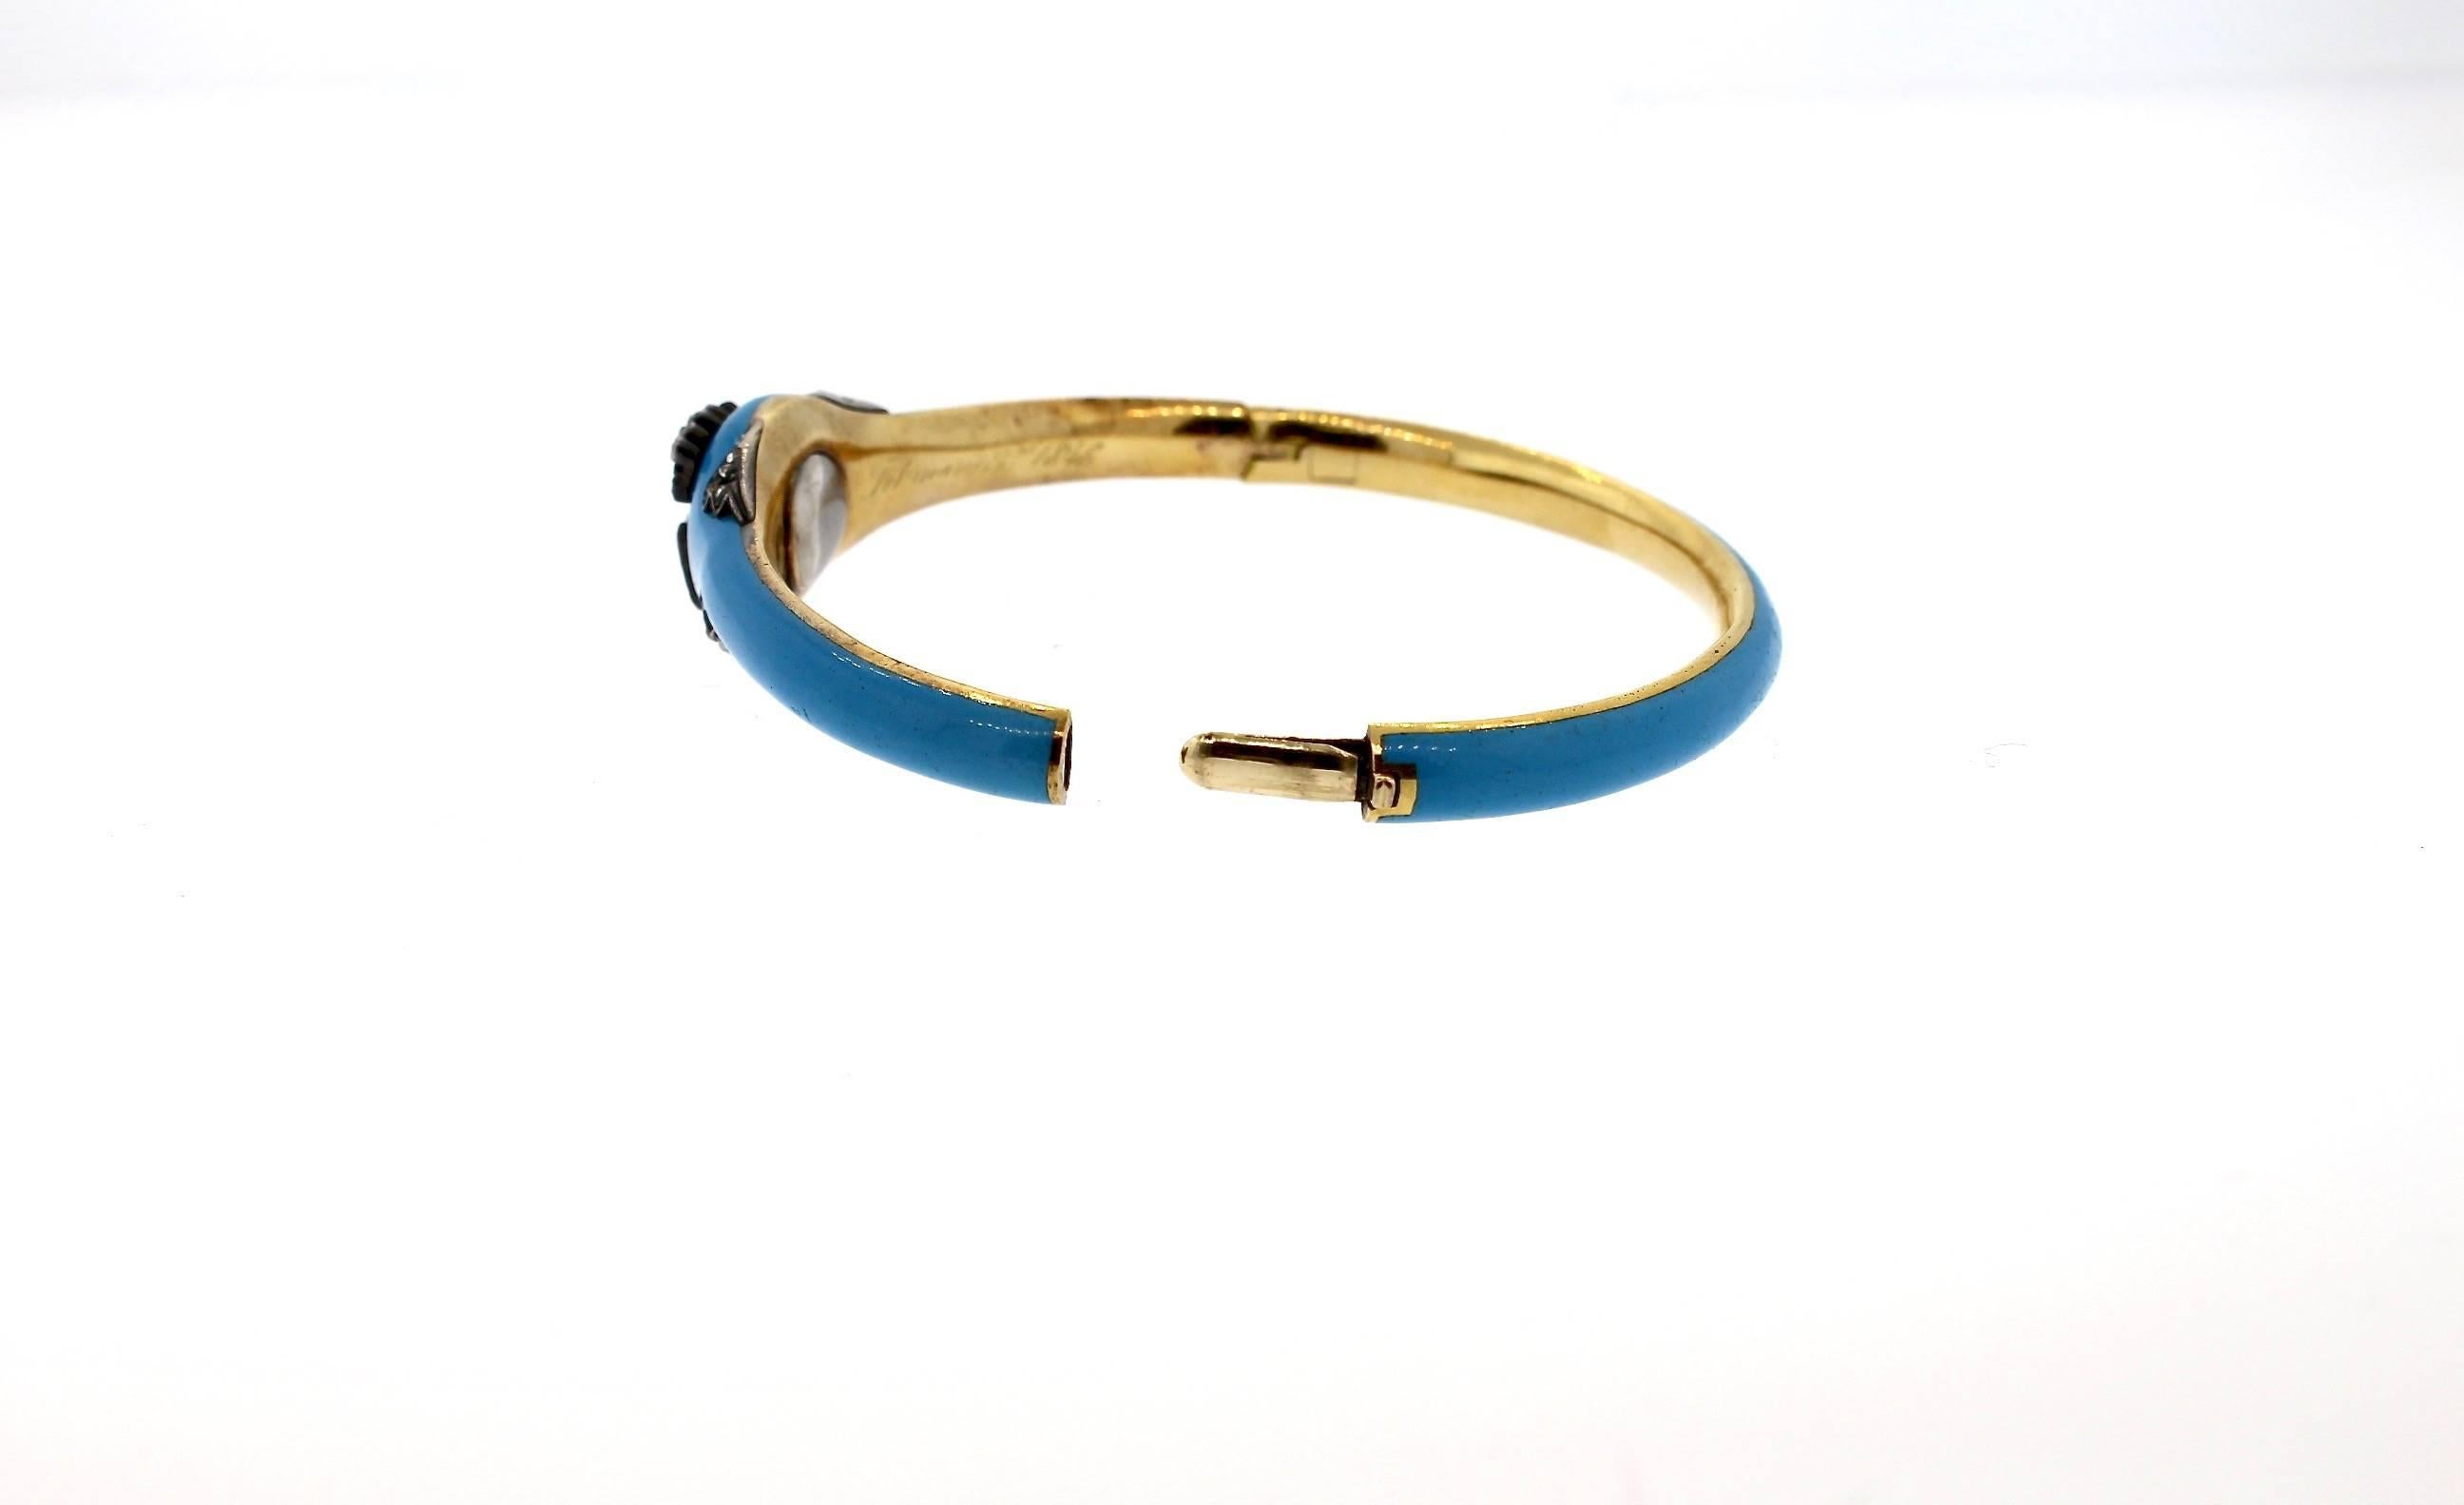 A collectible antique Victorian blue enamel bangle bracelet with rosecut diamonds, circa 1840. This bright robins egg blue Victorian enamel bangle is slim and delicate, yet perfectly feminine and fashionable.  It is made in 18k gold and silver tops